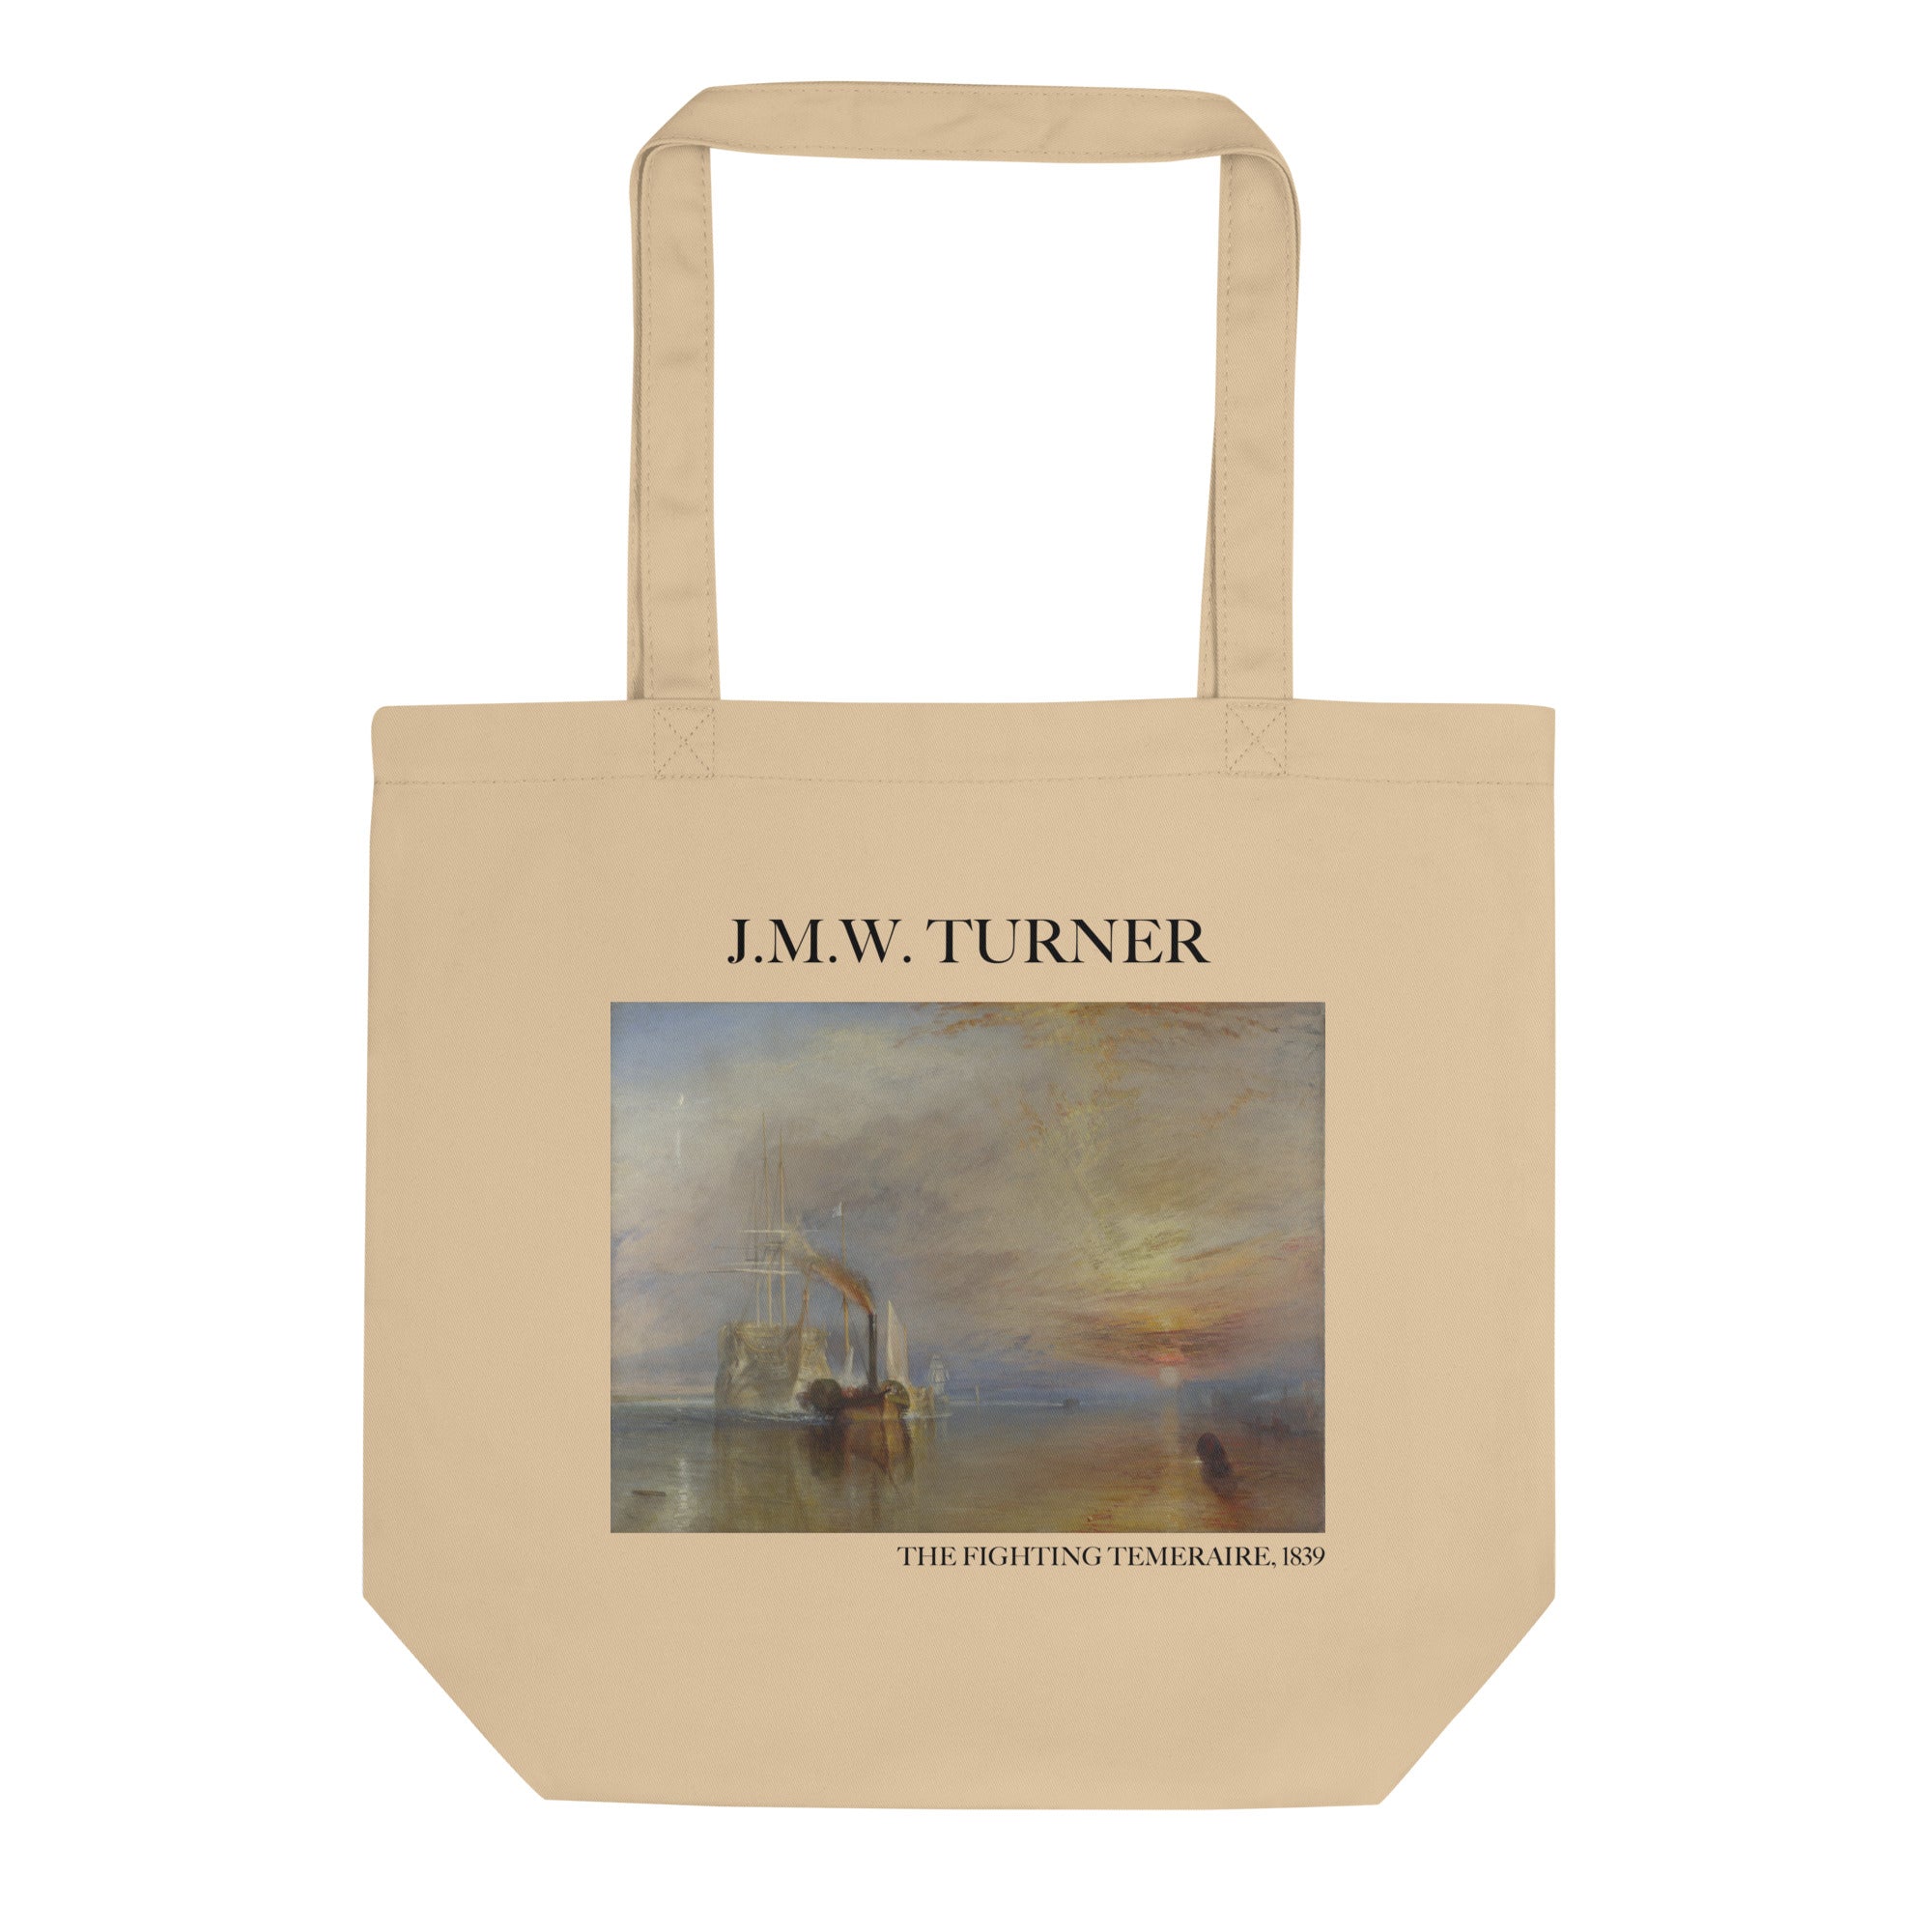 J.M.W. Turner 'The Fighting Temeraire' Famous Painting Totebag | Eco Friendly Art Tote Bag